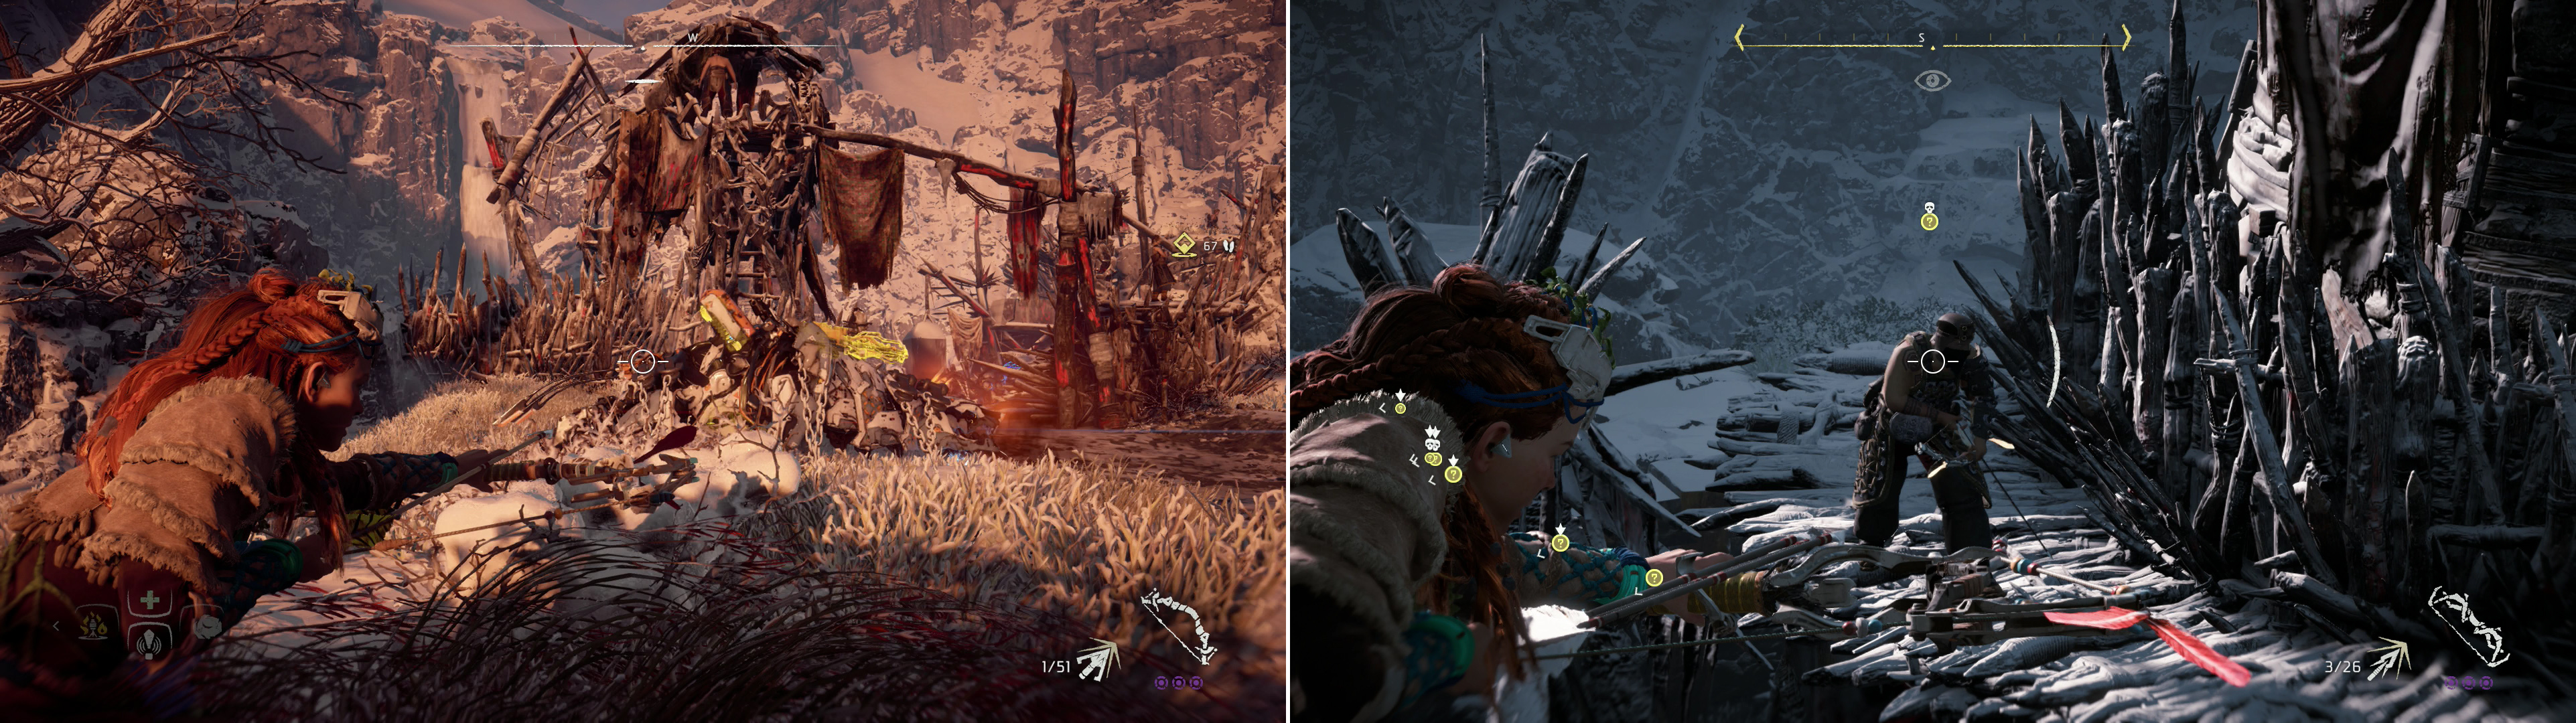 Shoots the chains tying down machines to unleash them on the Oseram (left). Don’t expect them to do all the work for you, however - some mercenaries will likely require your direct attention (right).